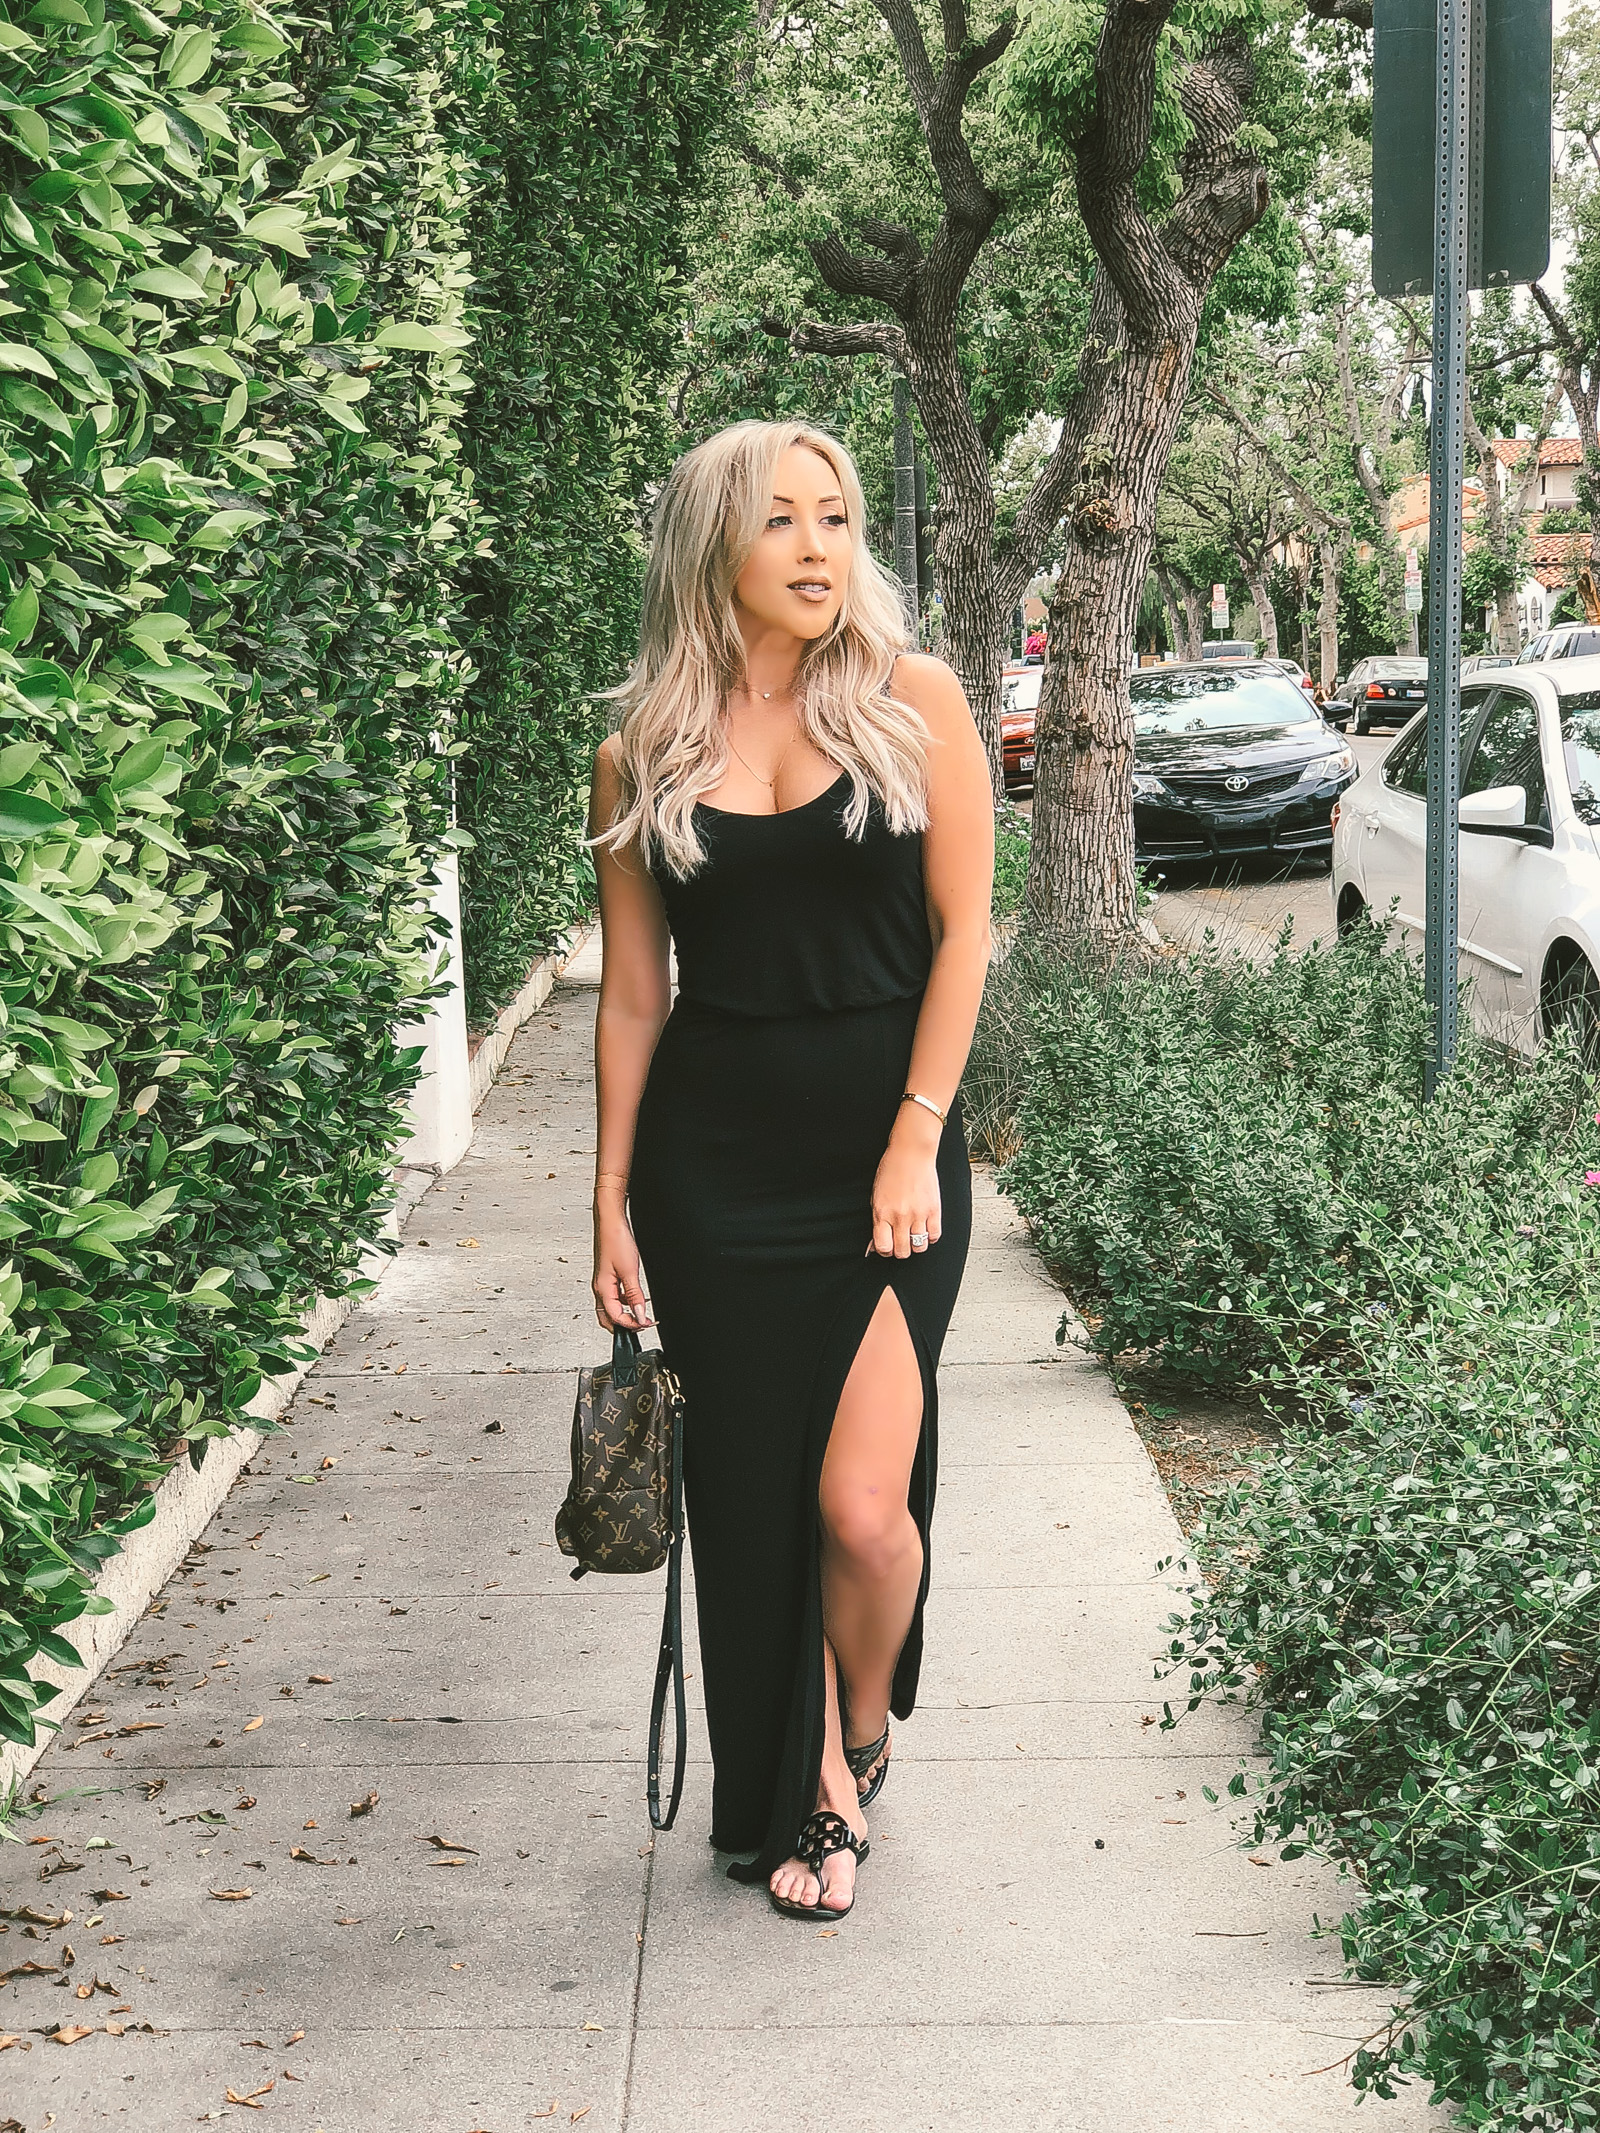 Black Maxi Dress w/ a slit | Louis Vuitton Palm Springs Backpack mini | iPhone vs. DSLR Photos | Blondie in the City by Hayley Larue